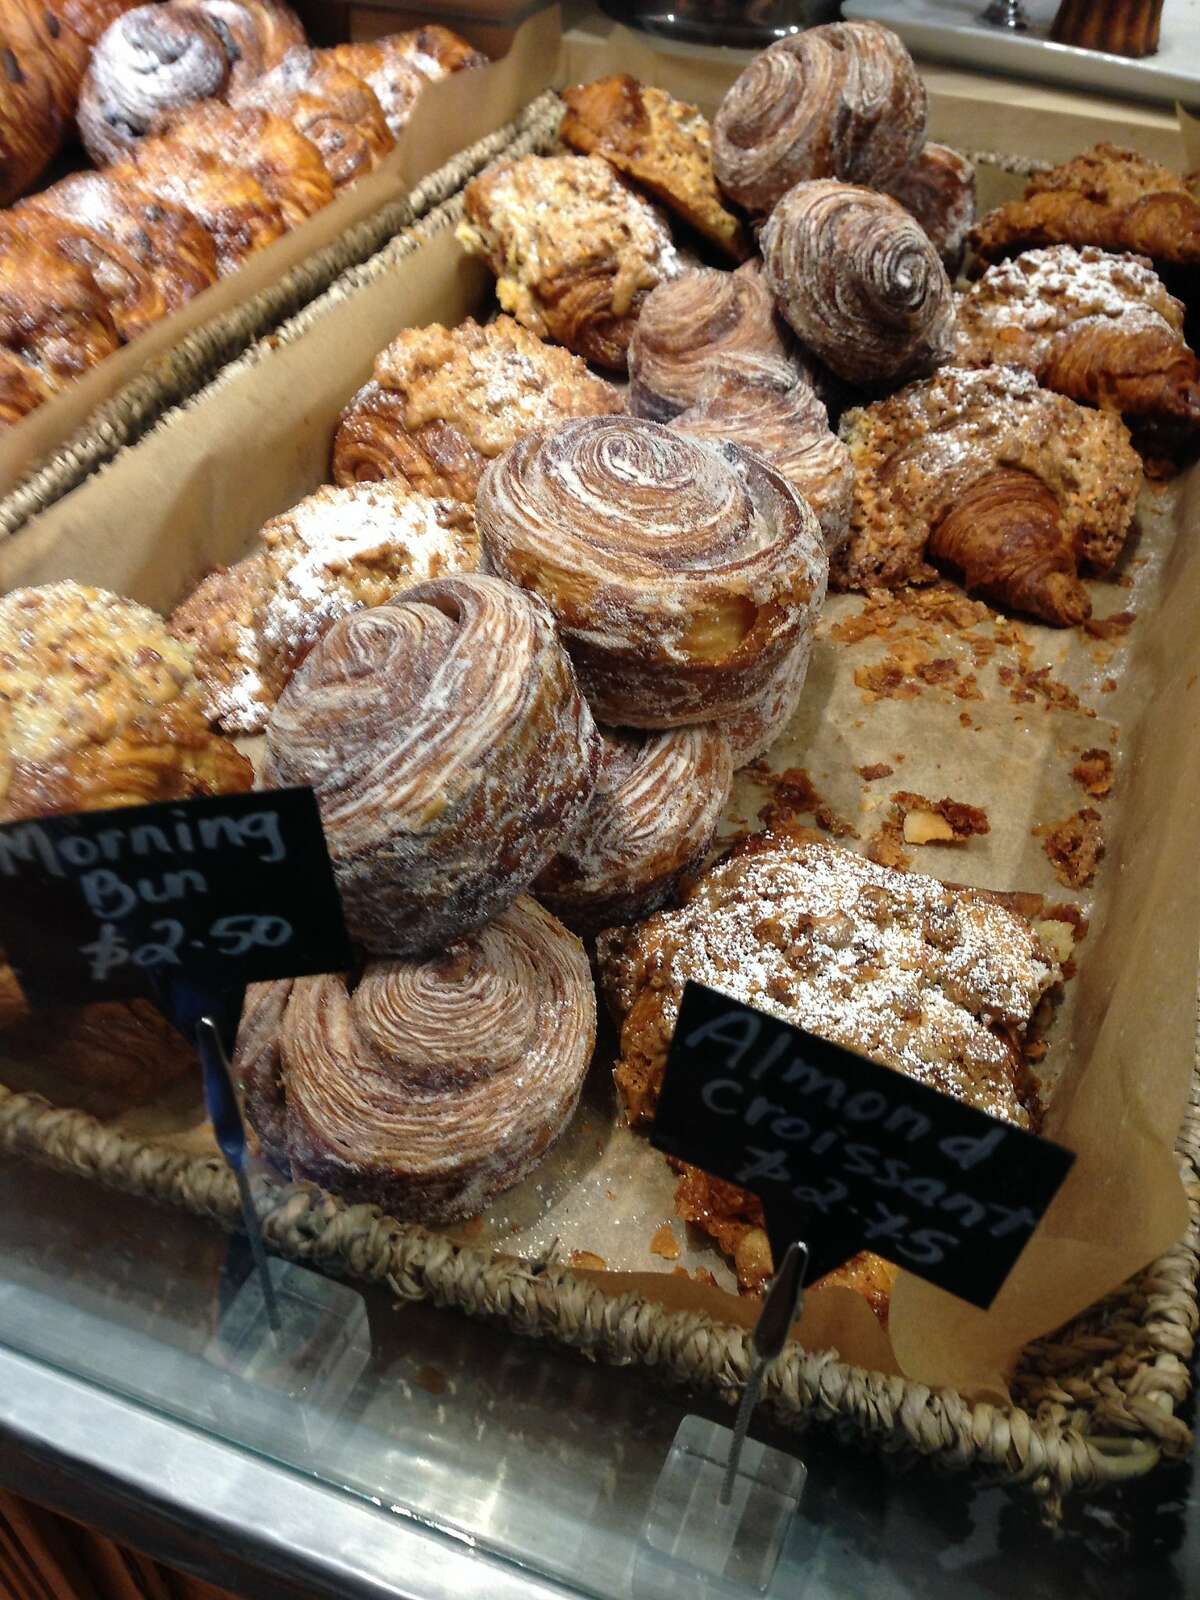 Connie Wong fave: Fourn e Bakery in Berkeley.